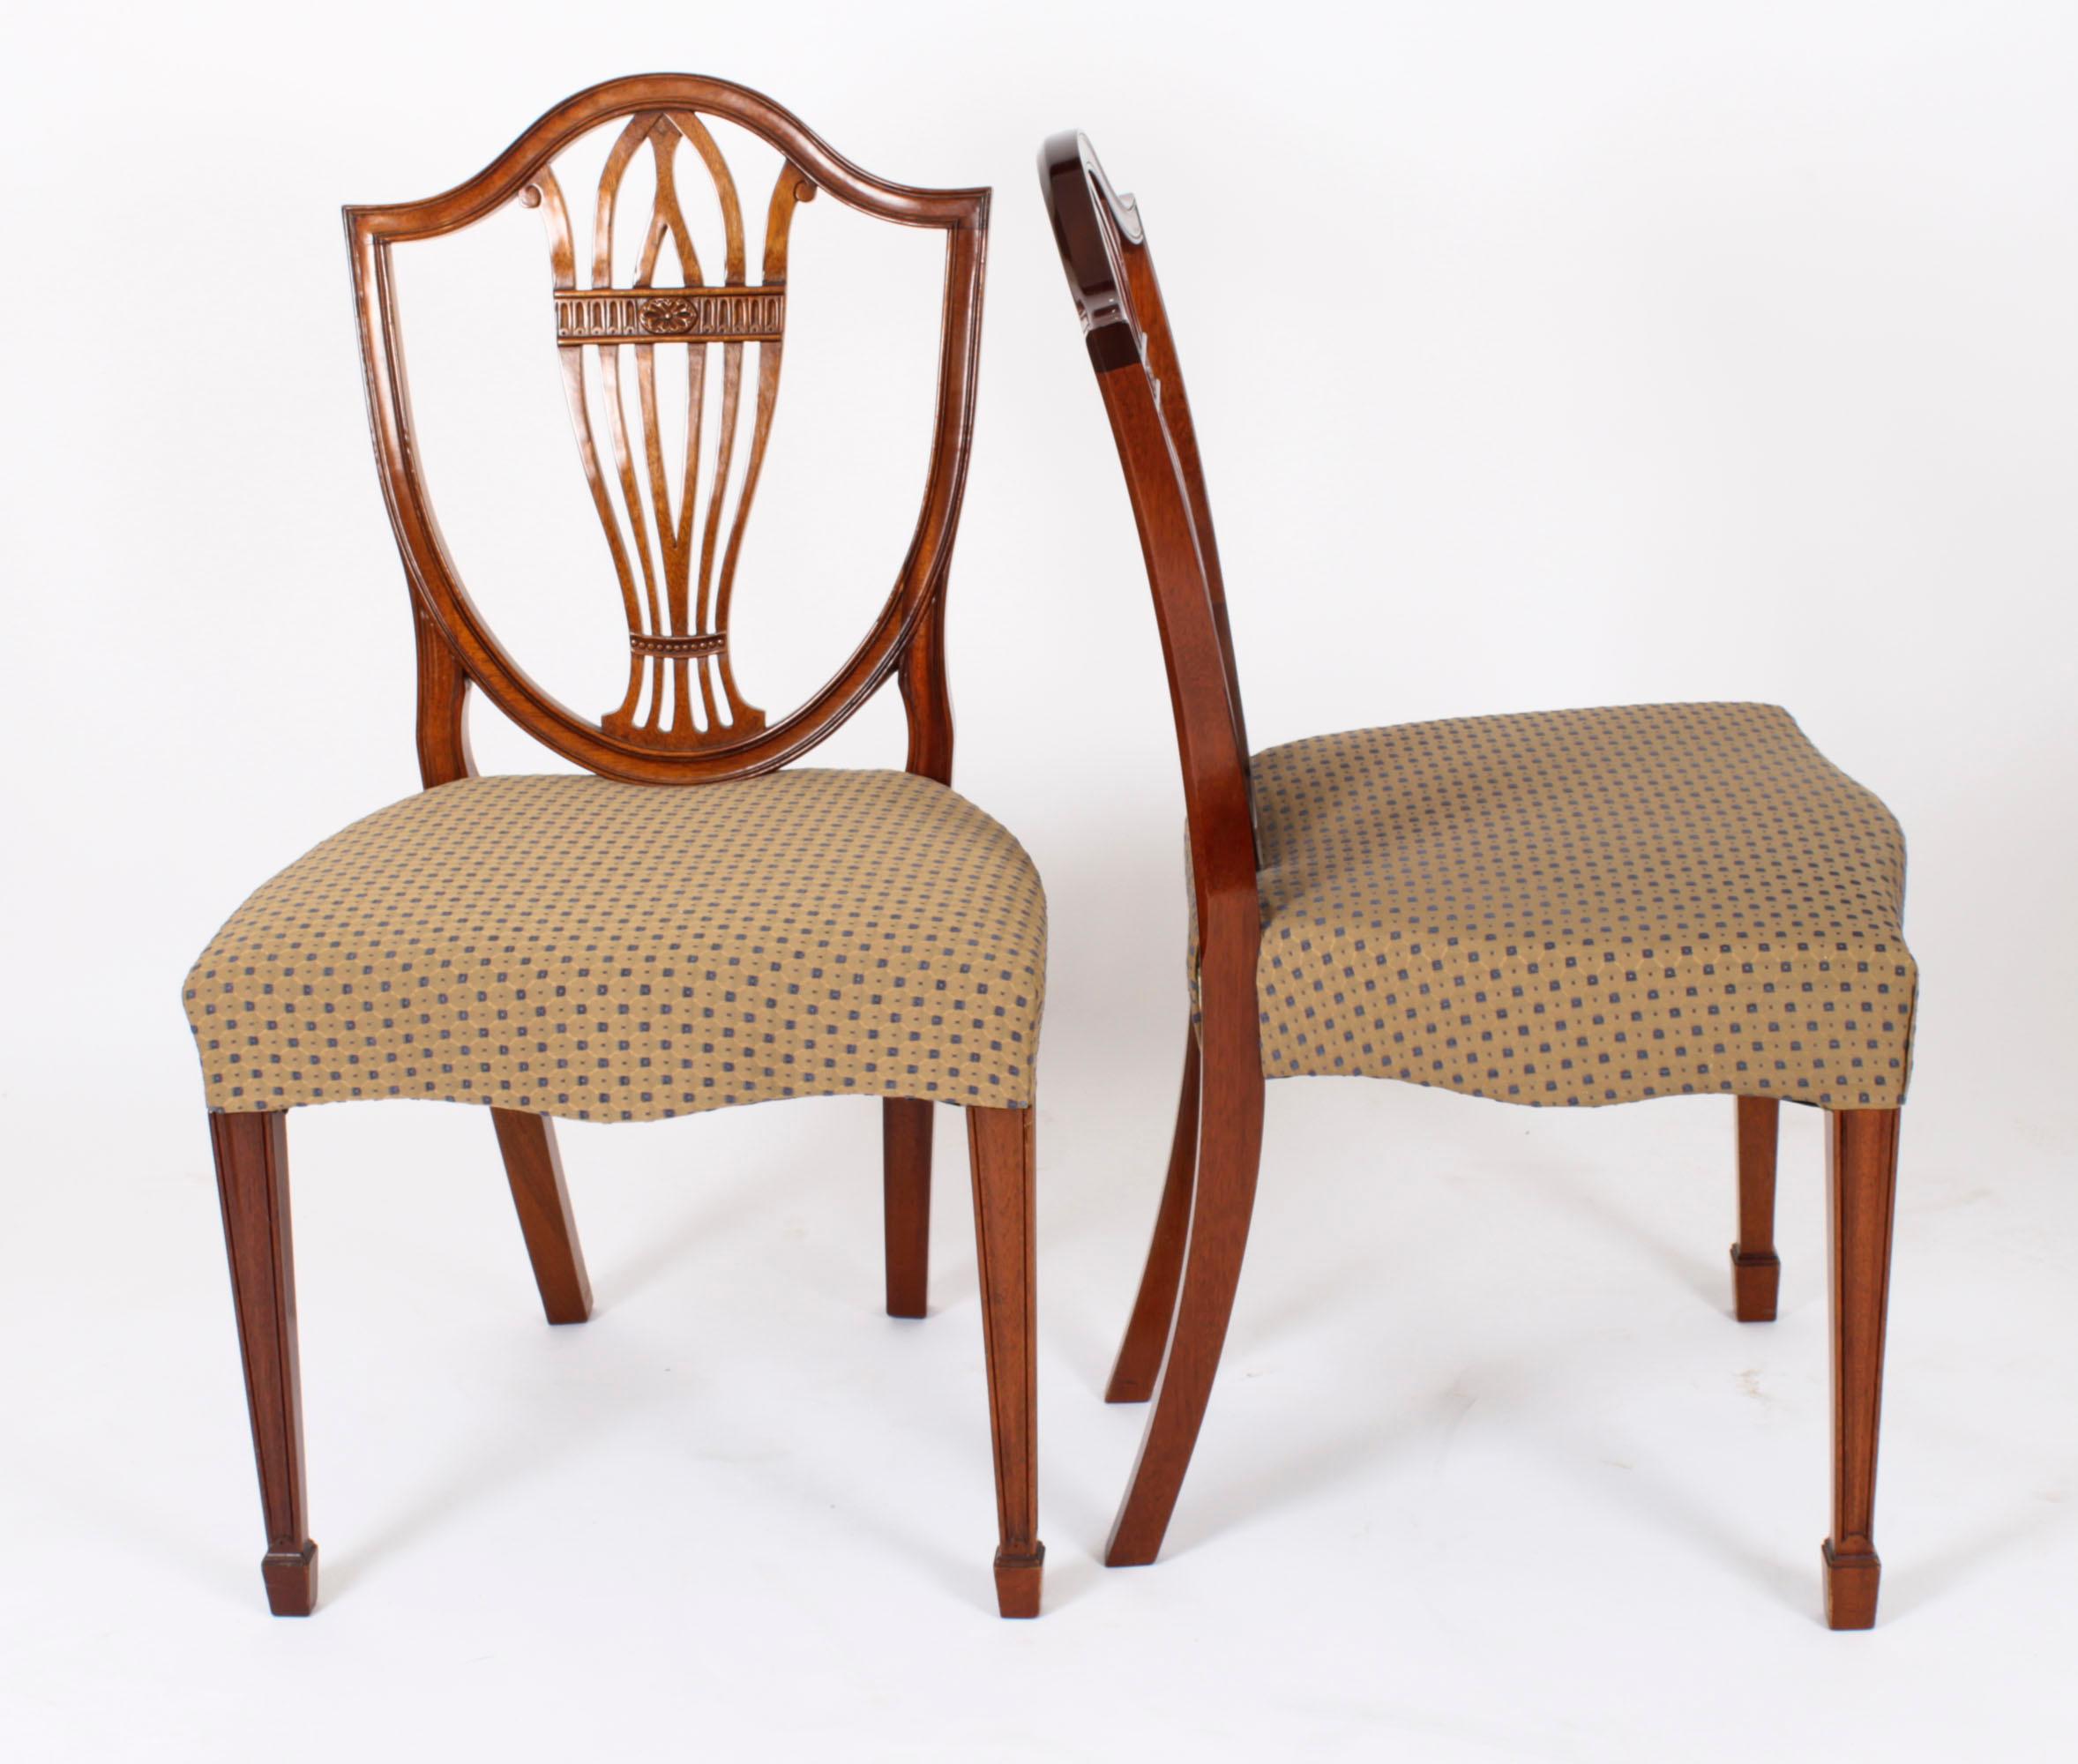 This is  a fabulous Vintage set of six mahogany Hepplewhite shield back dining chairs by William Tillman, Circa 1980 in date.

Purchased at great expense from the master cabinet maker William Tillman, Crouch Lane, Borough Green Kent in the